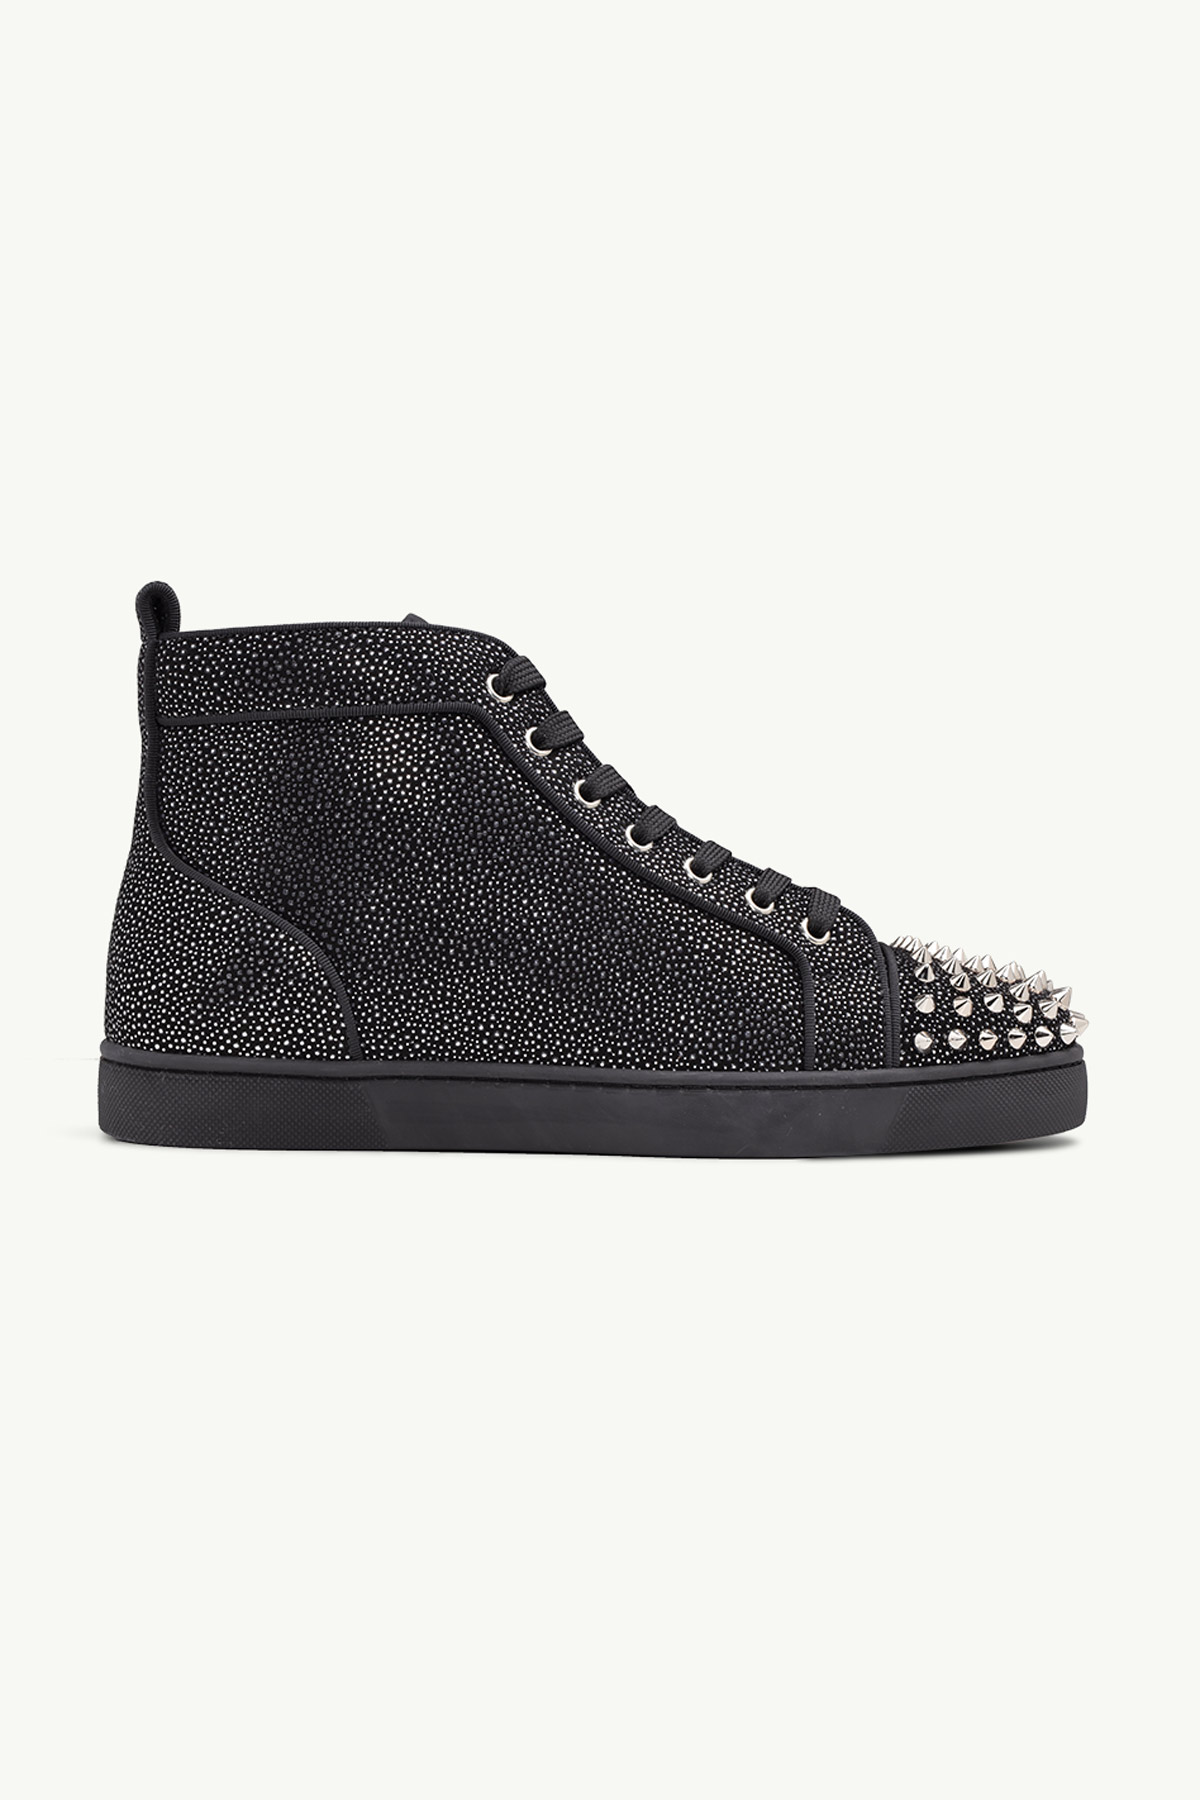 CHRISTIAN LOUBOUTIN Men Lou Spikes Orlato High Top Sneakers in Version Black Creative Leather 0